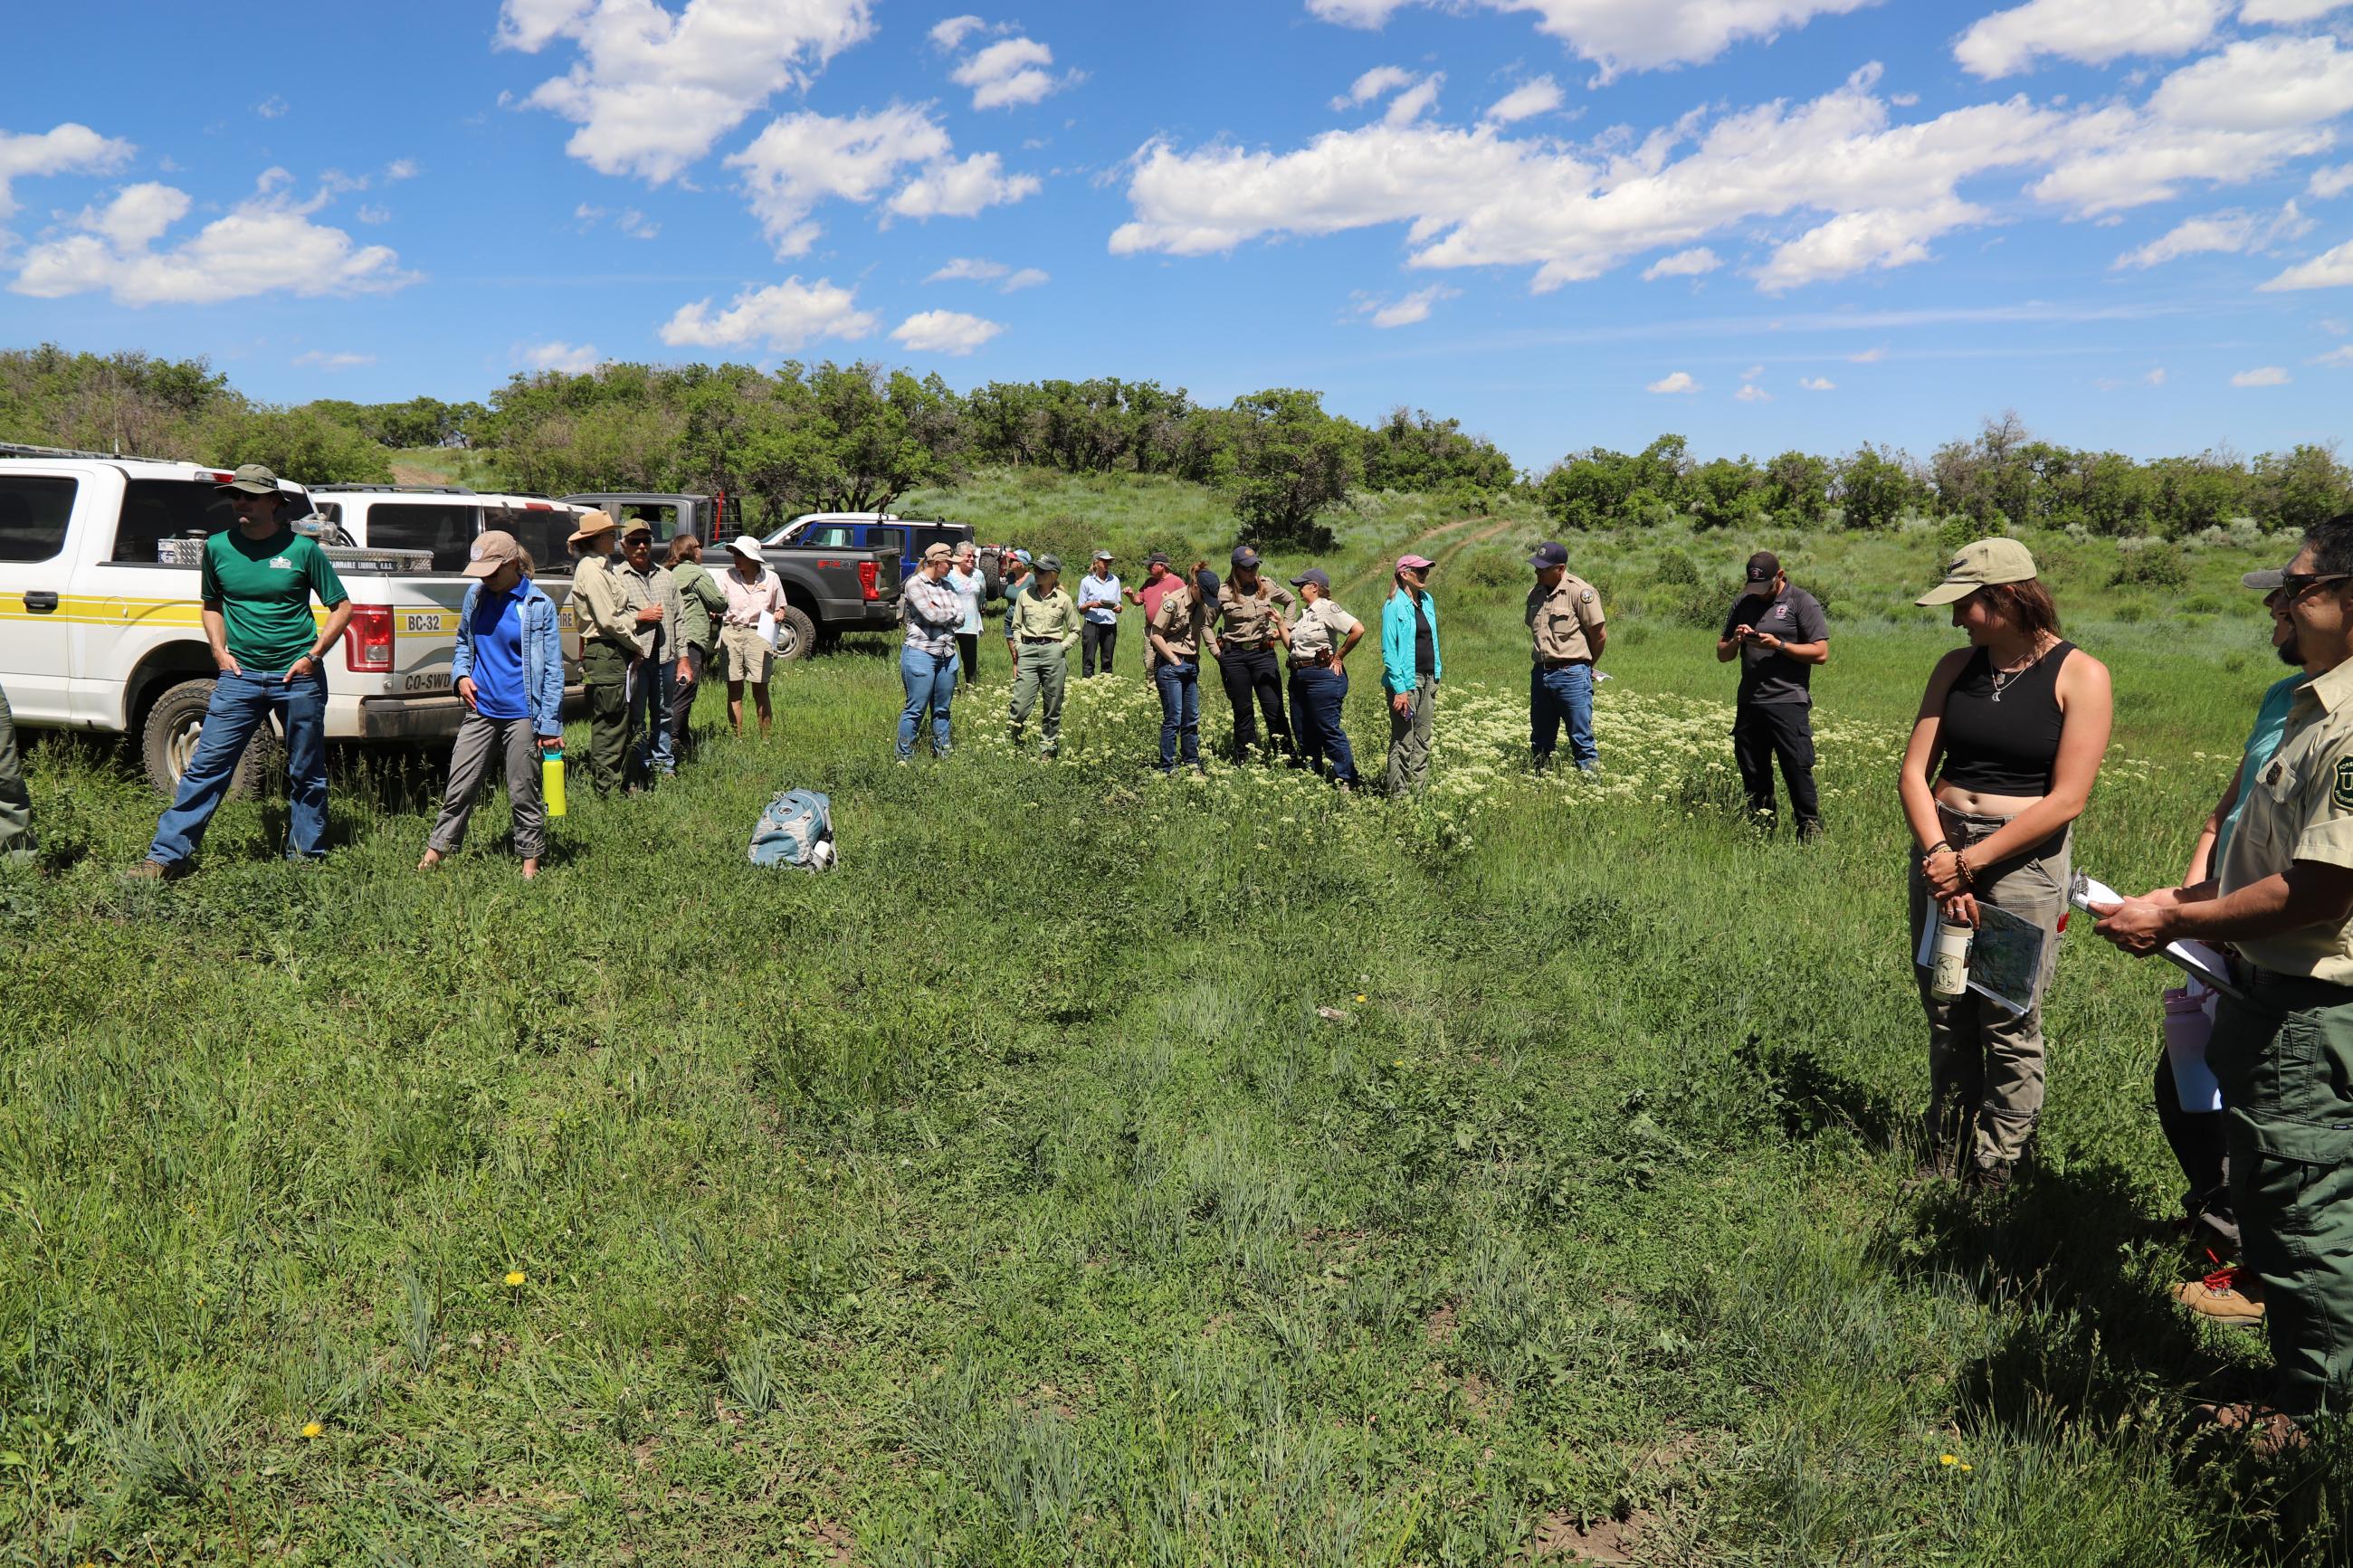 The image shows about 15 individuals standing in a grassy field watching someone speak, with a pickup truck on the left